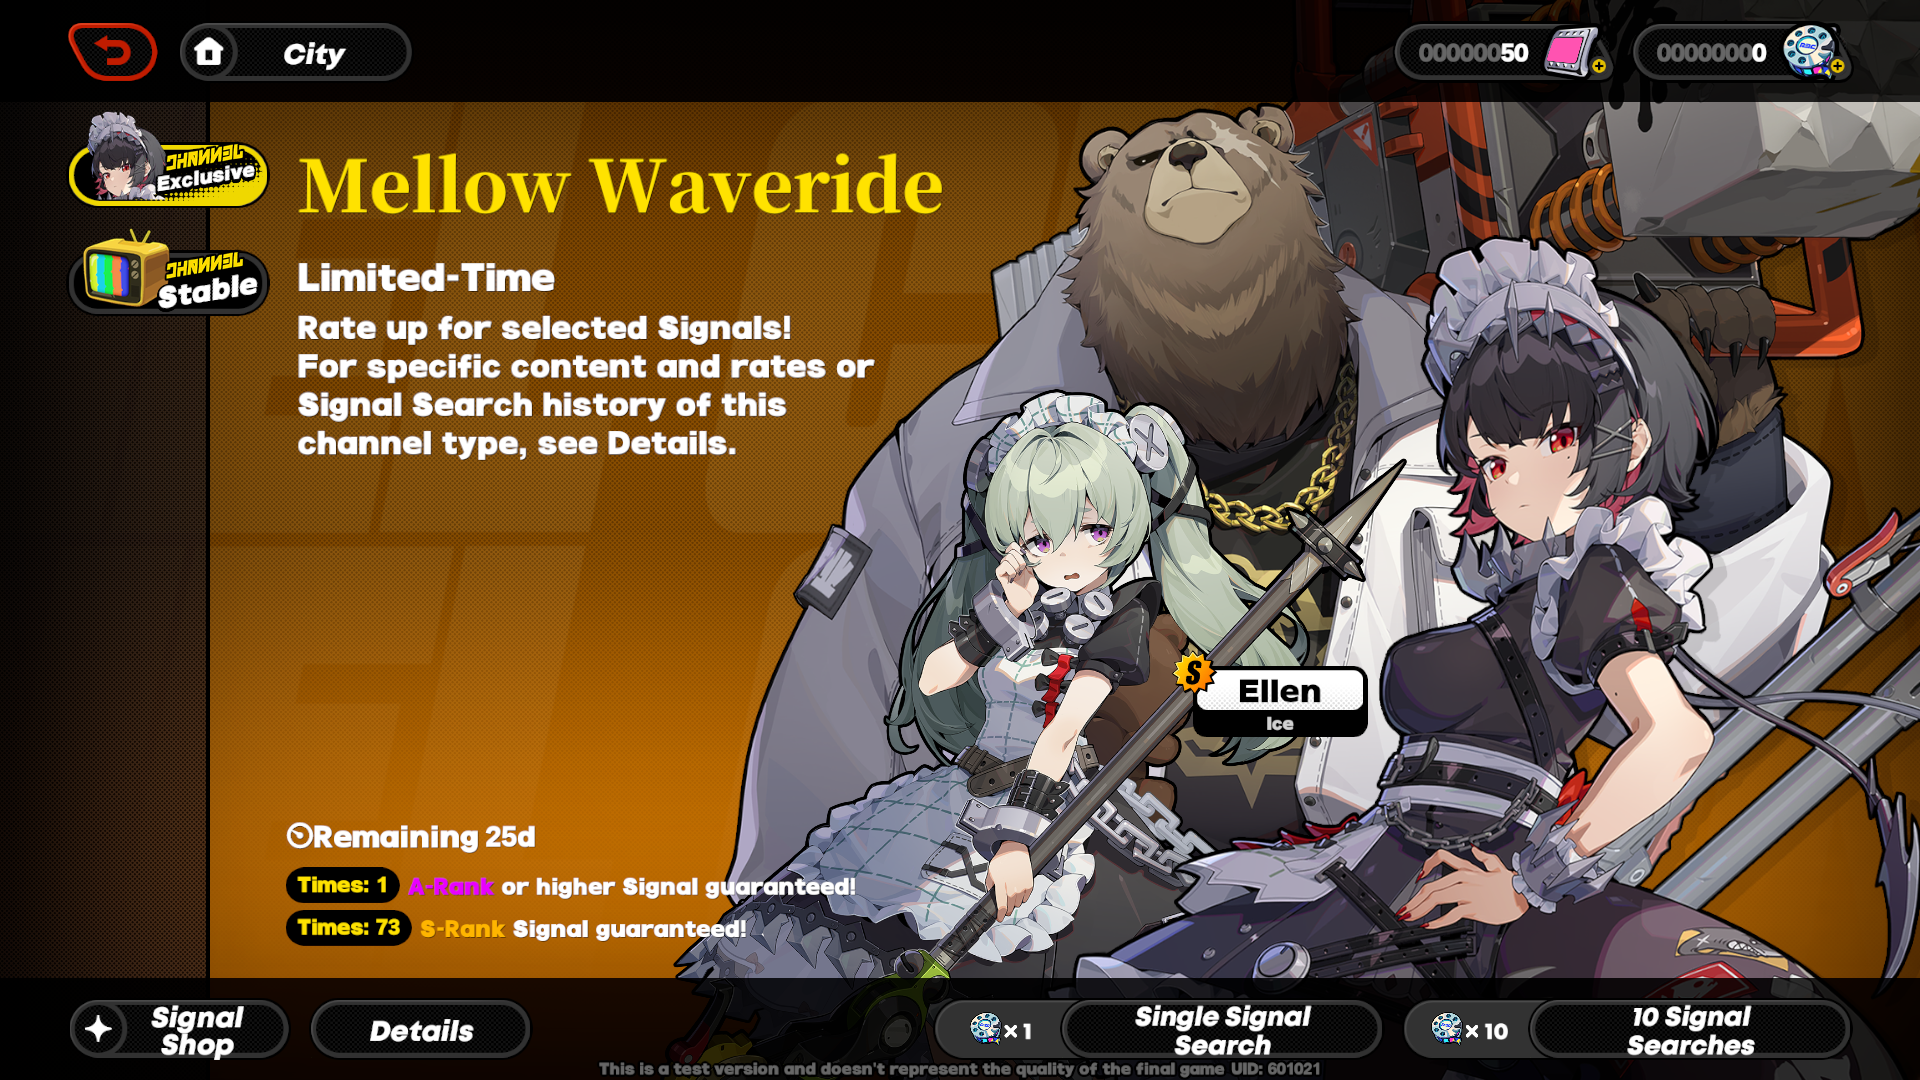 The Mellow Waveride banner in ZZZ.